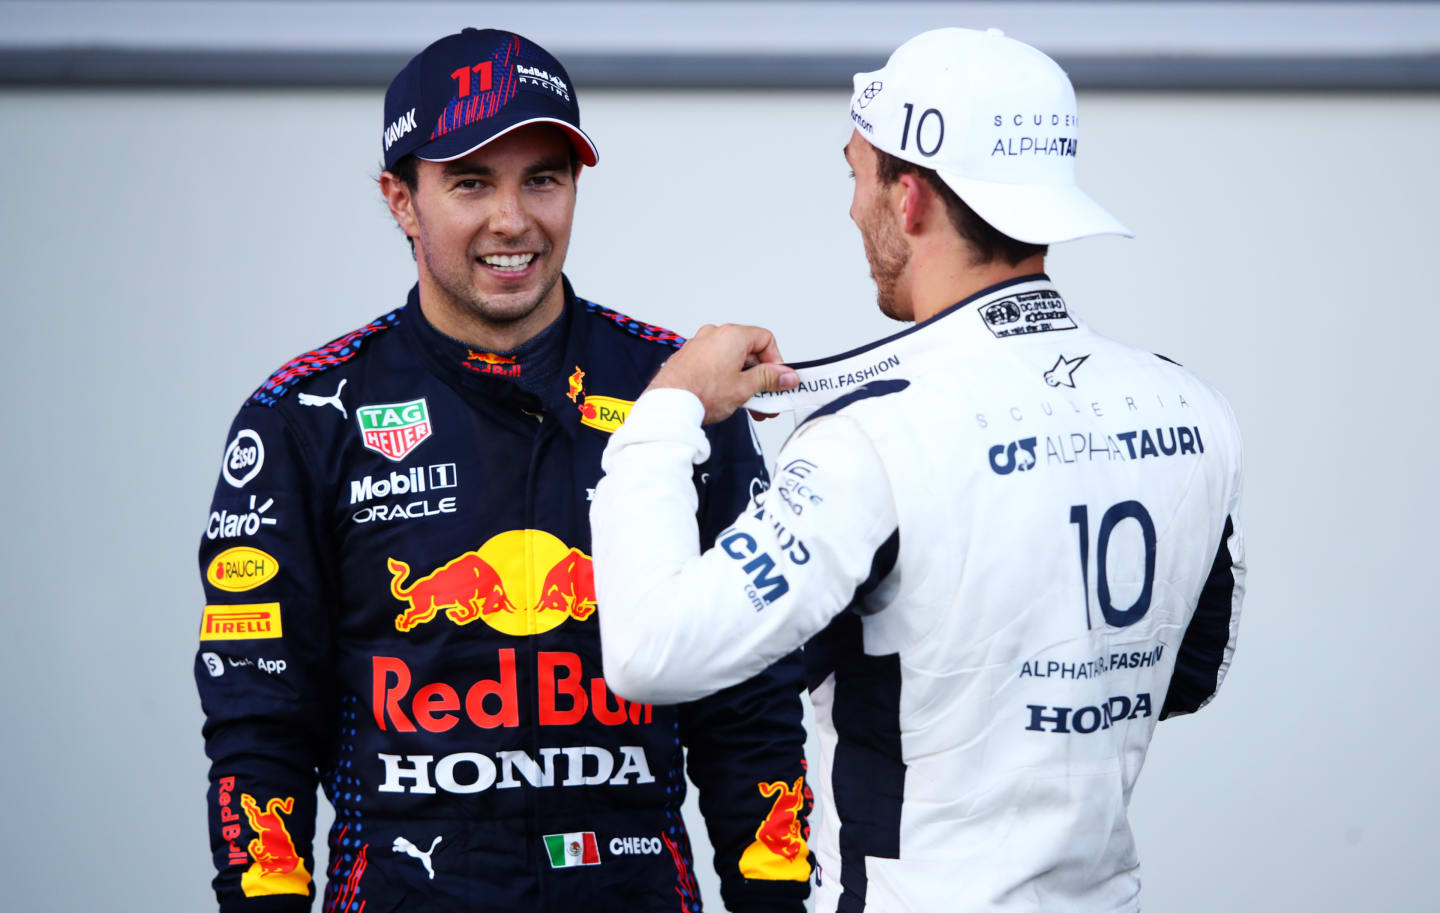 BAKU, AZERBAIJAN - JUNE 06: Race winner Sergio Perez of Mexico and Red Bull Racing and third placed Pierre Gasly of France and Scuderia AlphaTauri talk in parc ferme during the F1 Grand Prix of Azerbaijan at Baku City Circuit on June 06, 2021 in Baku, Azerbaijan. (Photo by Mark Thompson/Getty Images)